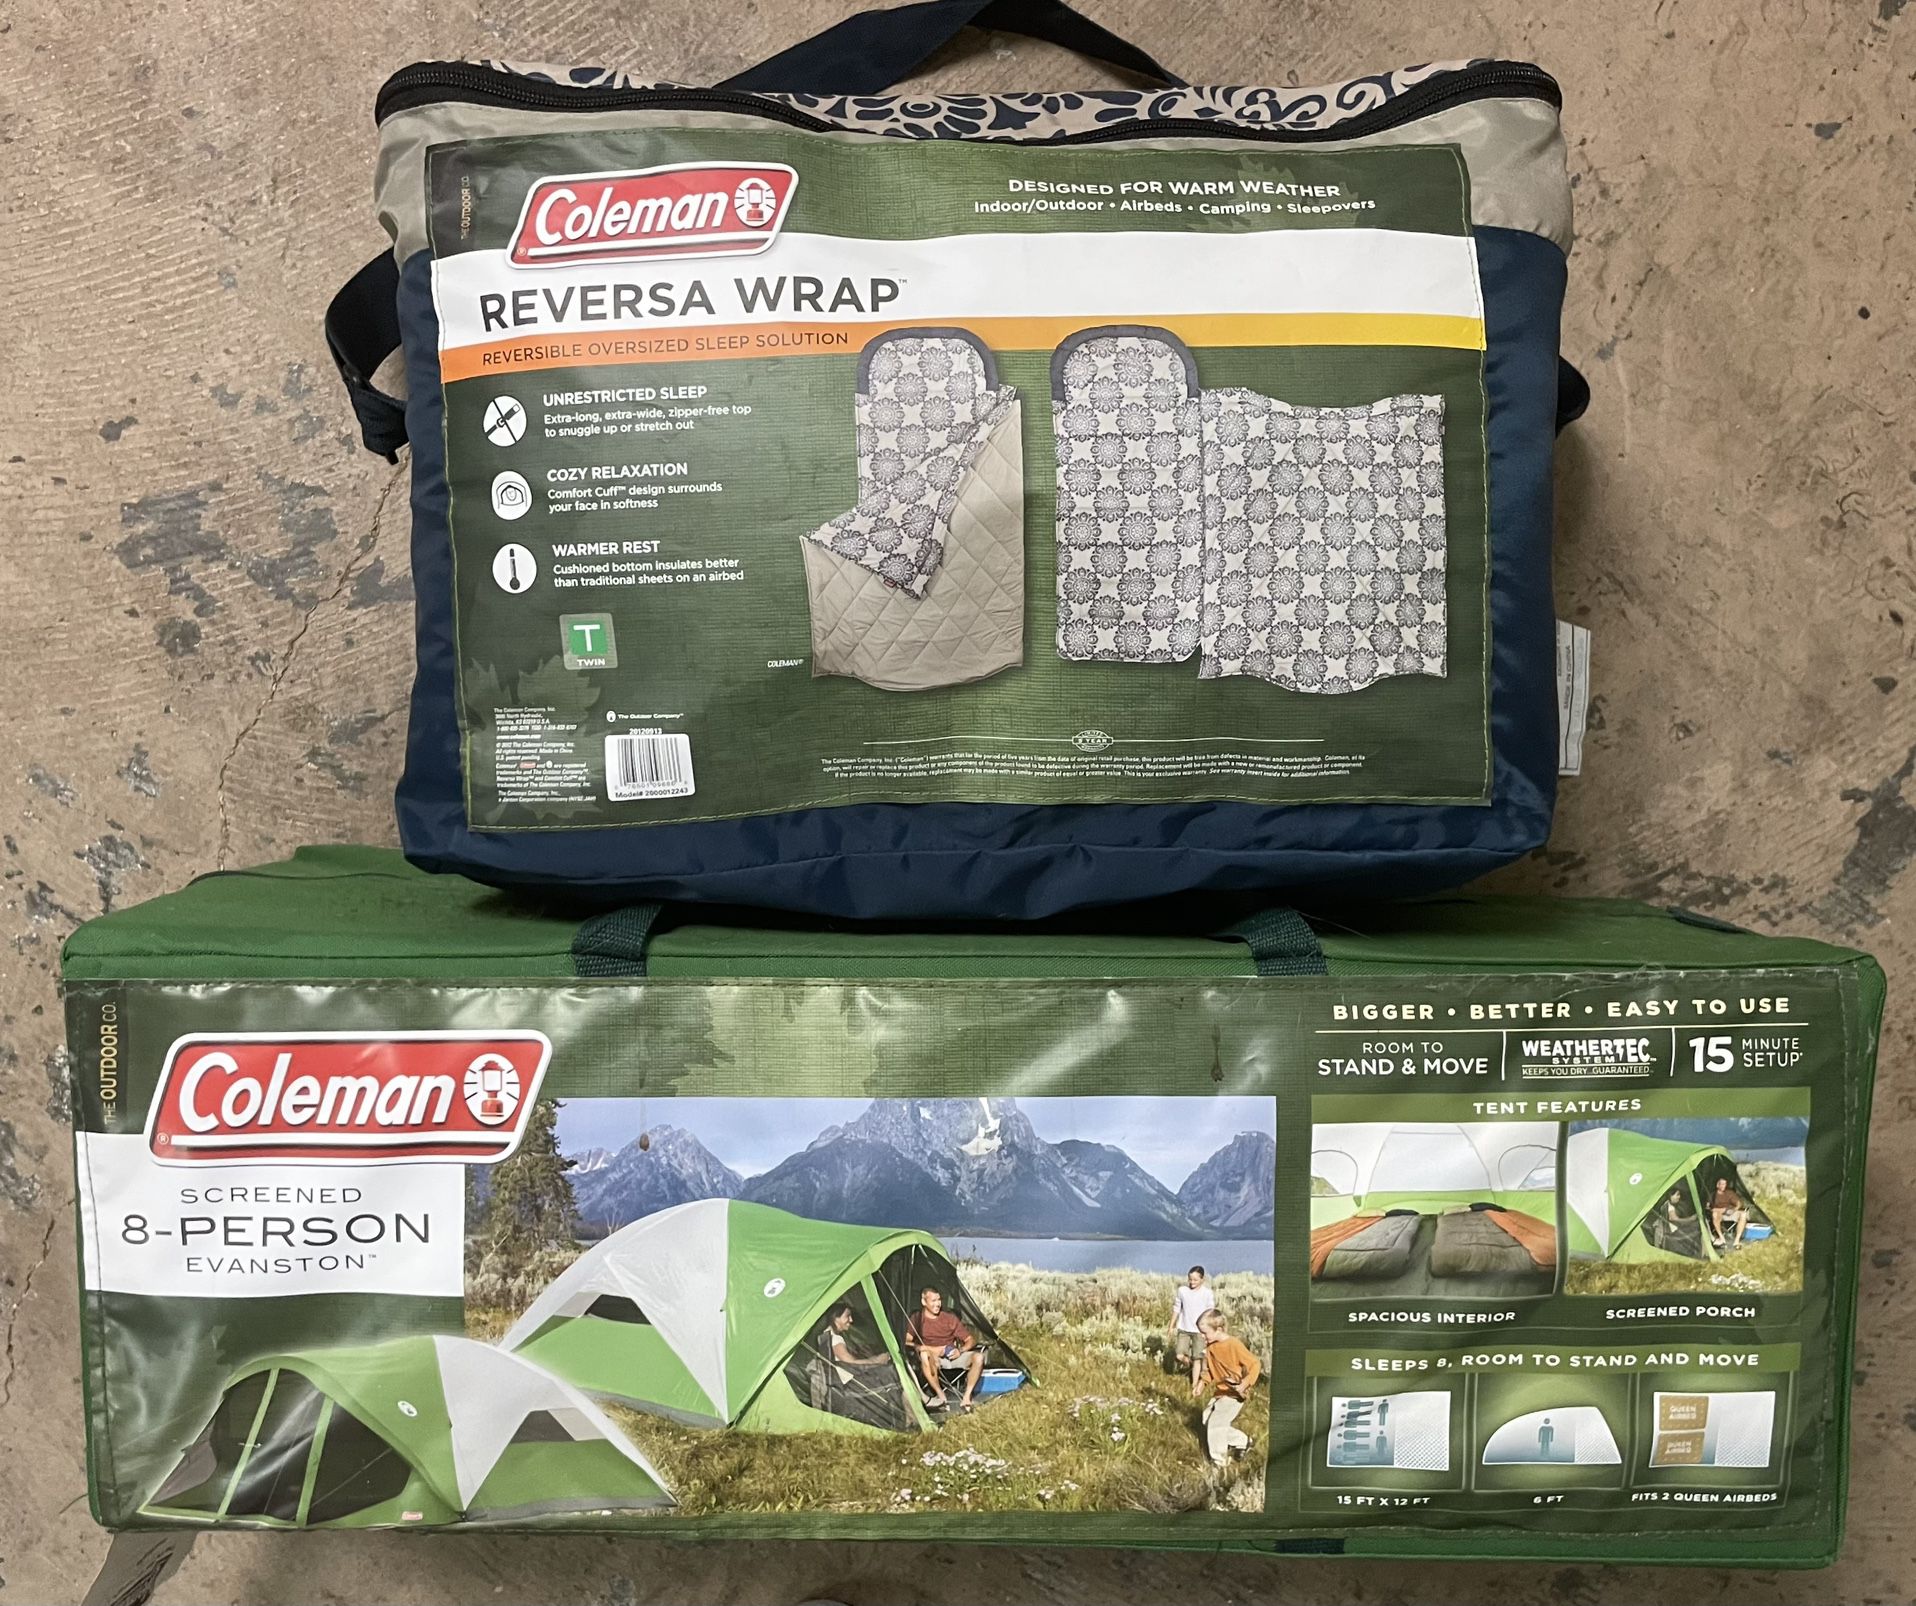 Camping Gear New Never Used